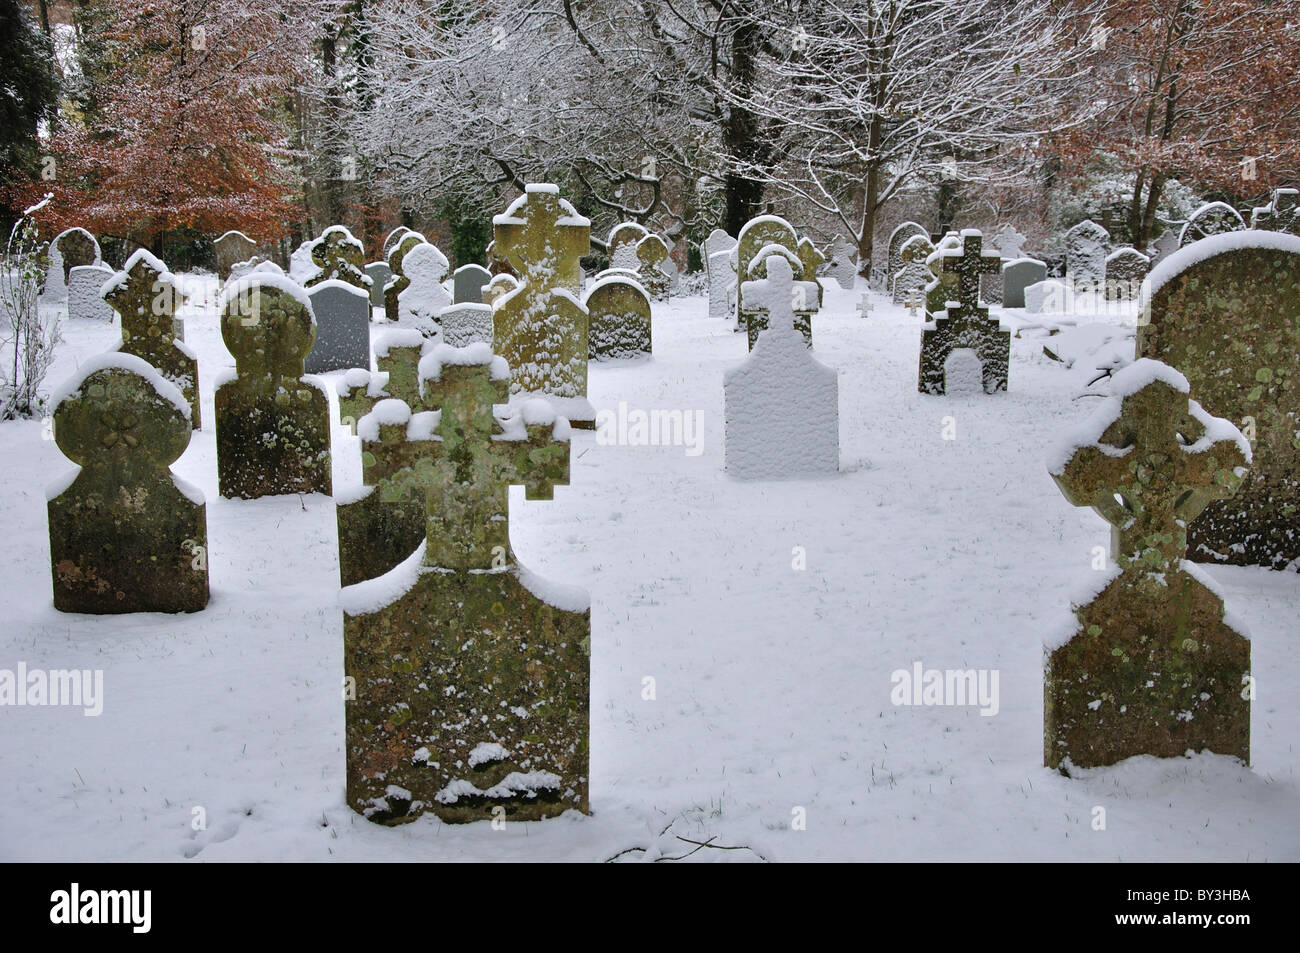 Churchyard with snow covered gravestones after snowfall. Dorset, UK December 2010 Stock Photo